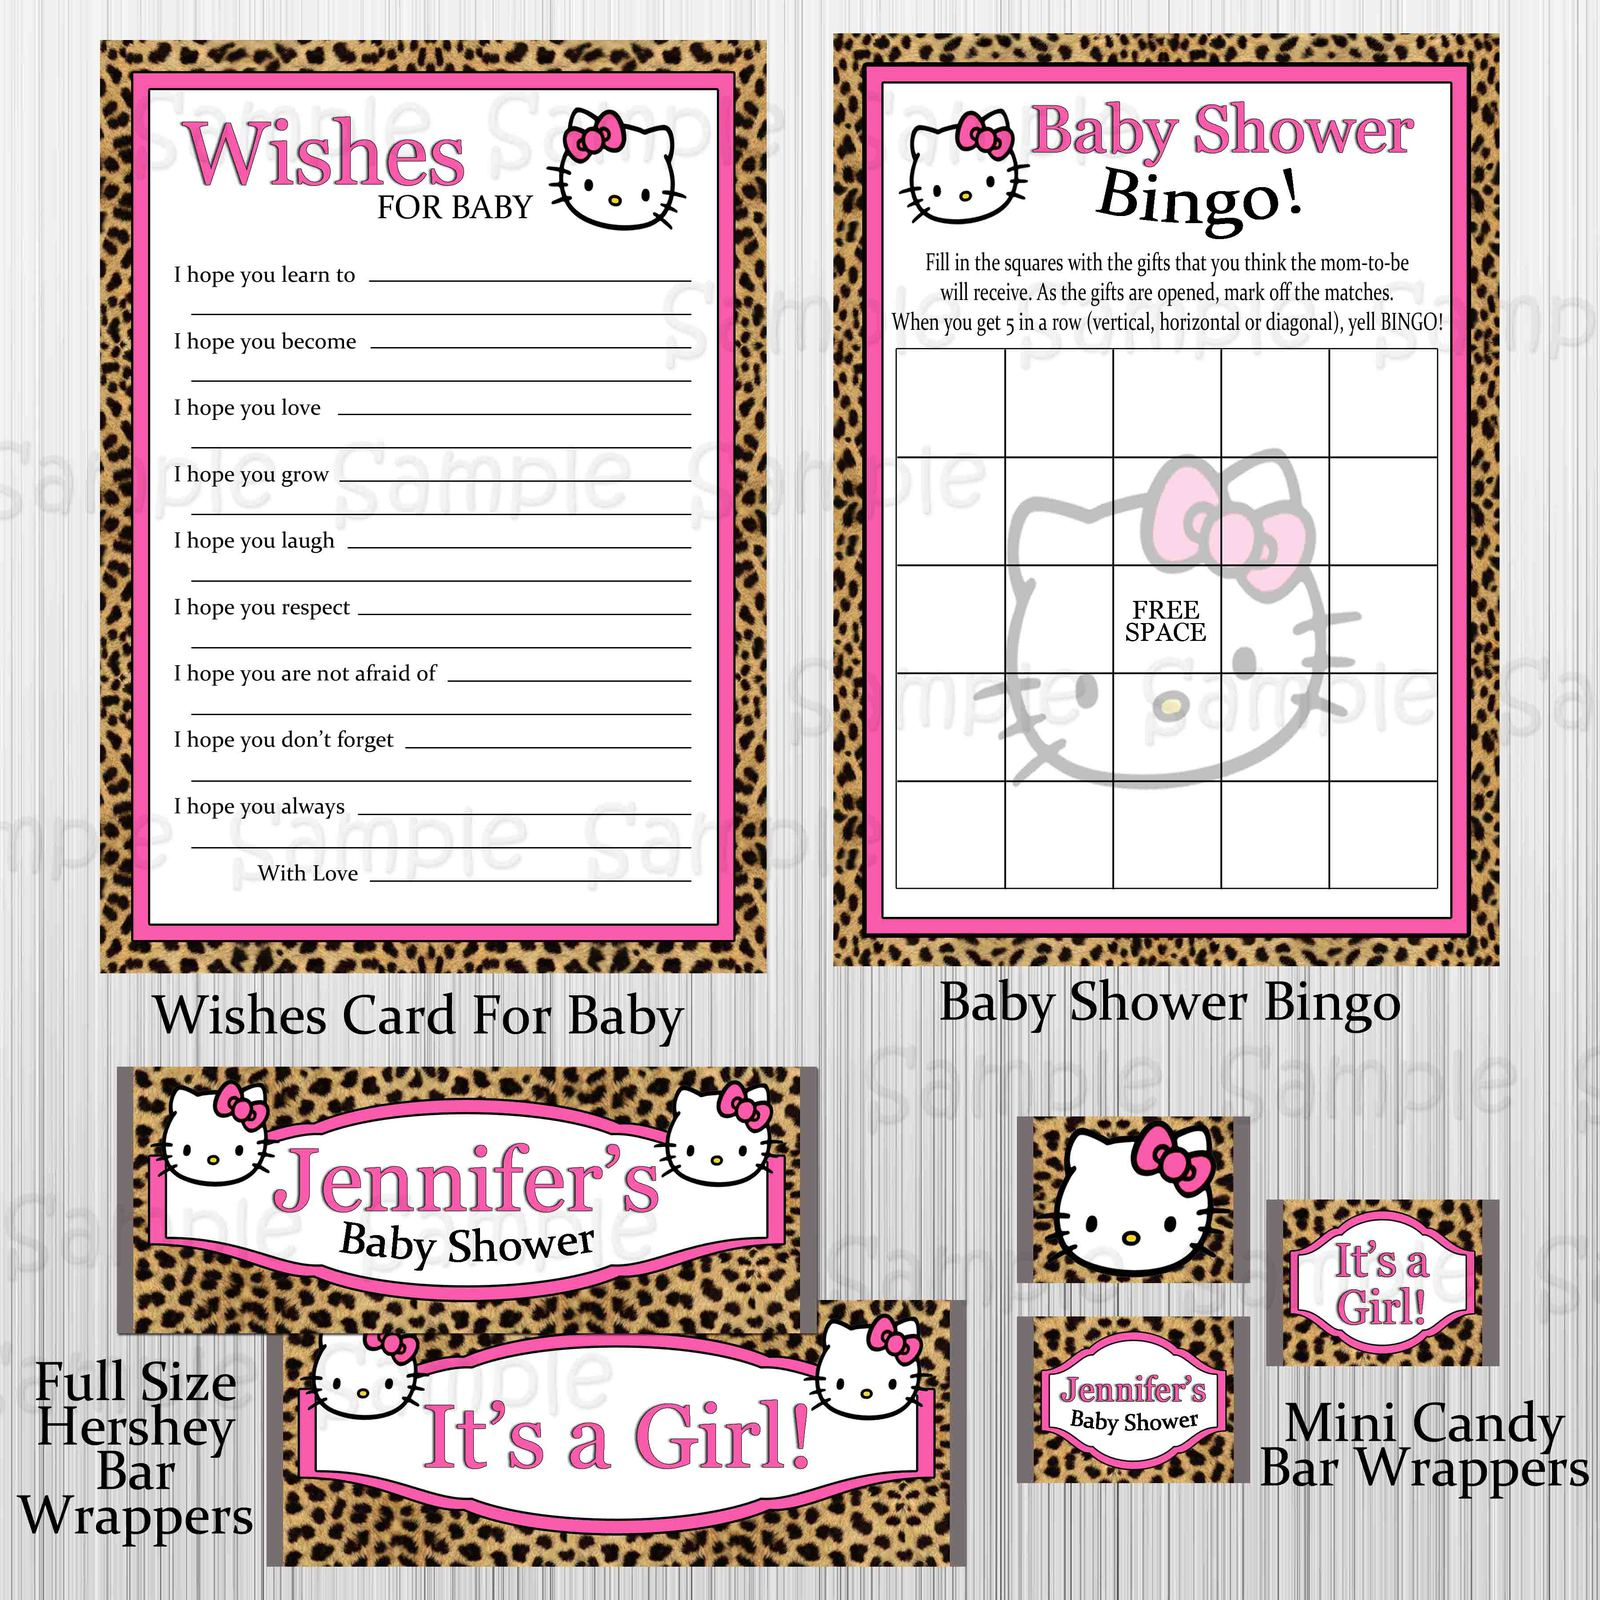 Cheetah Hello Kitty Baby Shower Party And 50 Similar Items